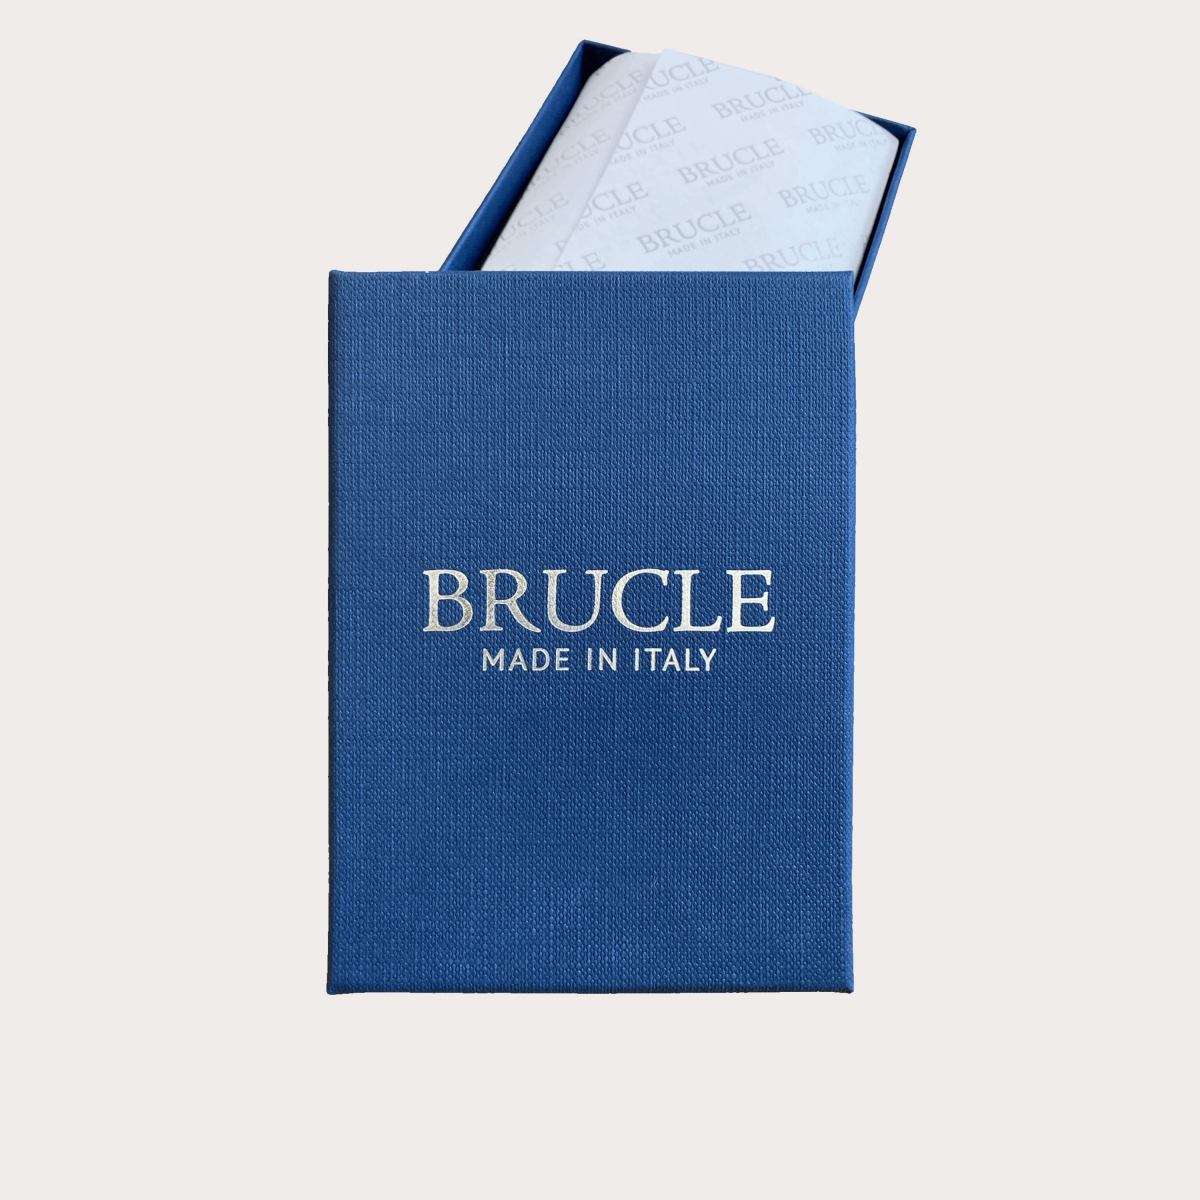 BRUCLE Classic keychain in crocodile or alligator leather, matte blue